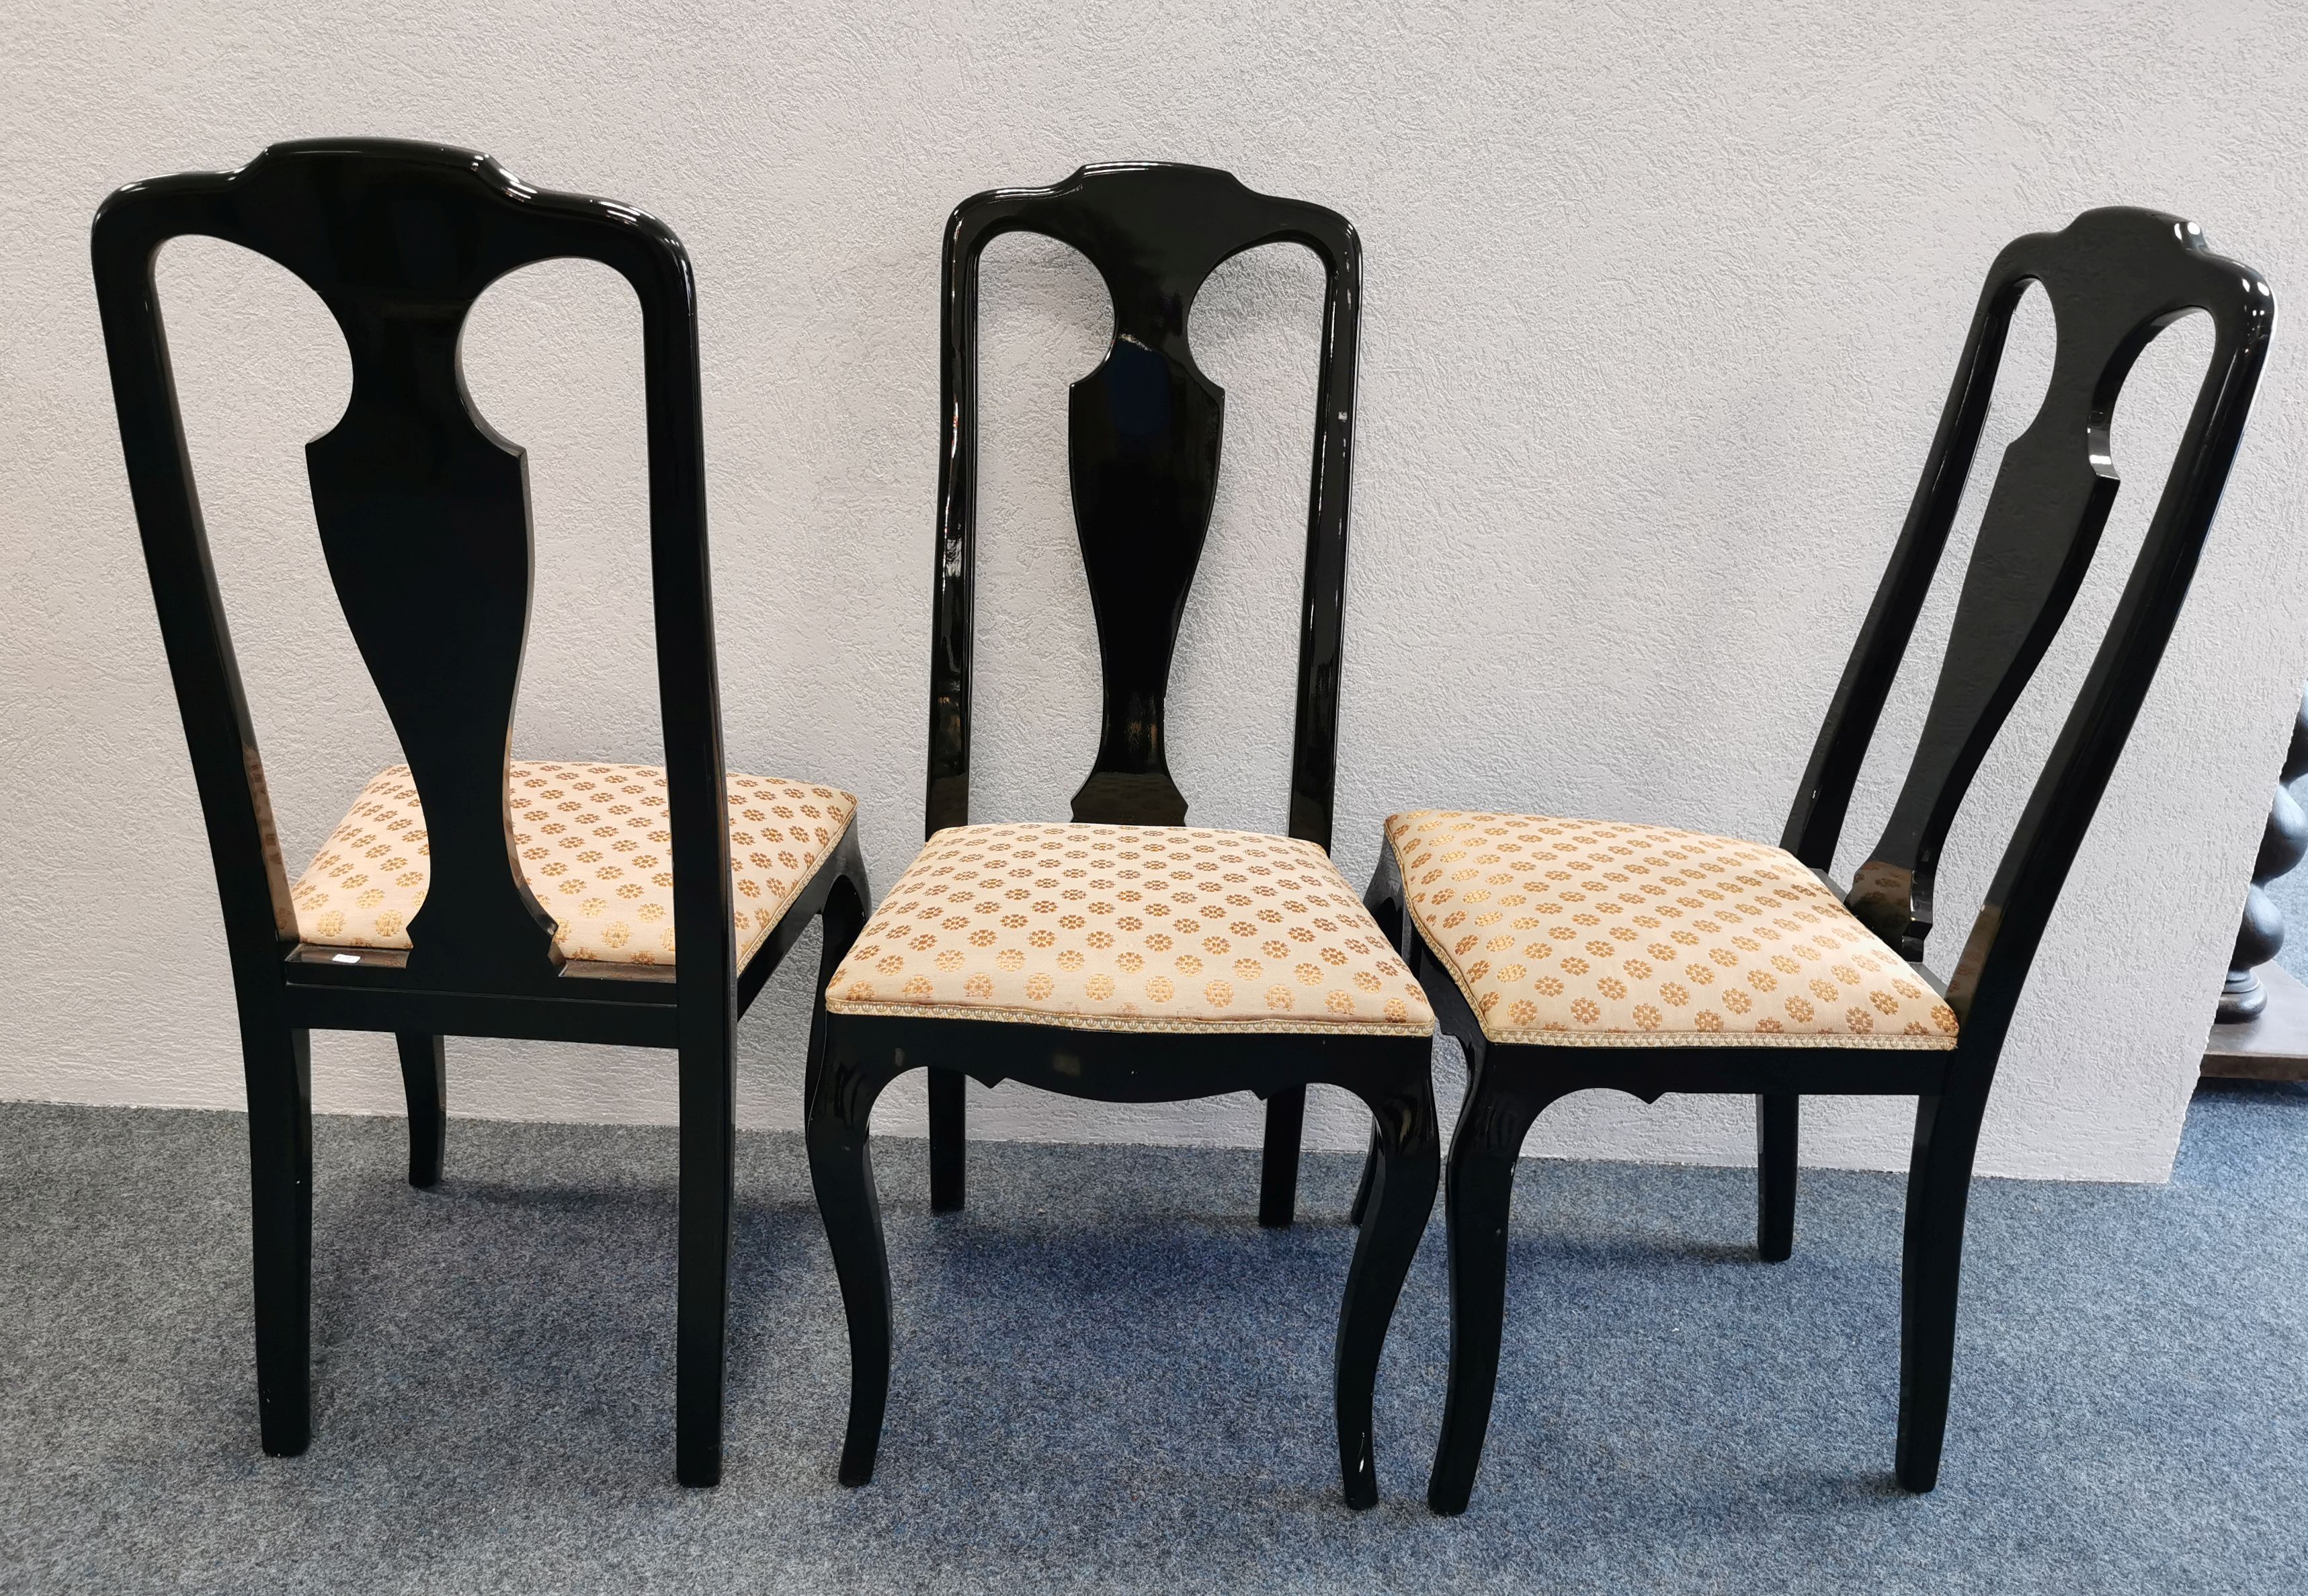 SET OF 6 CHAIRS - Image 2 of 3